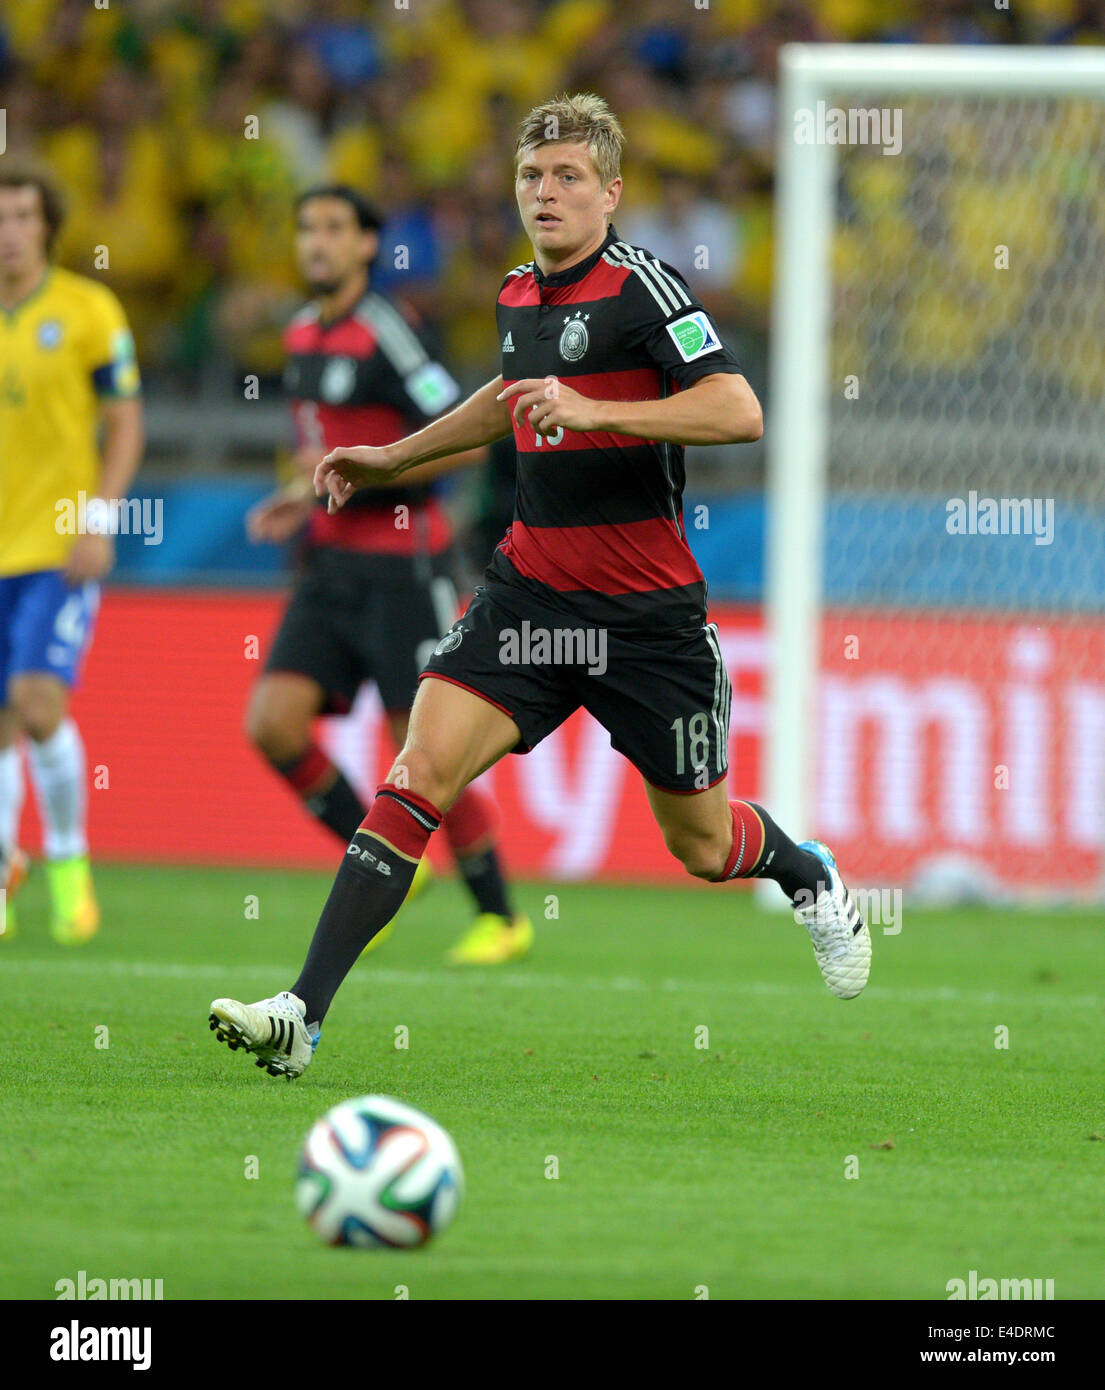 Belo Horizonte, Brazil. 08th July, 2014. Germany's Toni Kroos during the FIFA World Cup 2014 semi-final soccer match between Brazil and Germany at Estadio Mineirao in Belo Horizonte, Brazil, 08 July 2014. Photo: Thomas Eisenhuth/dpa/Alamy Live News Stock Photo